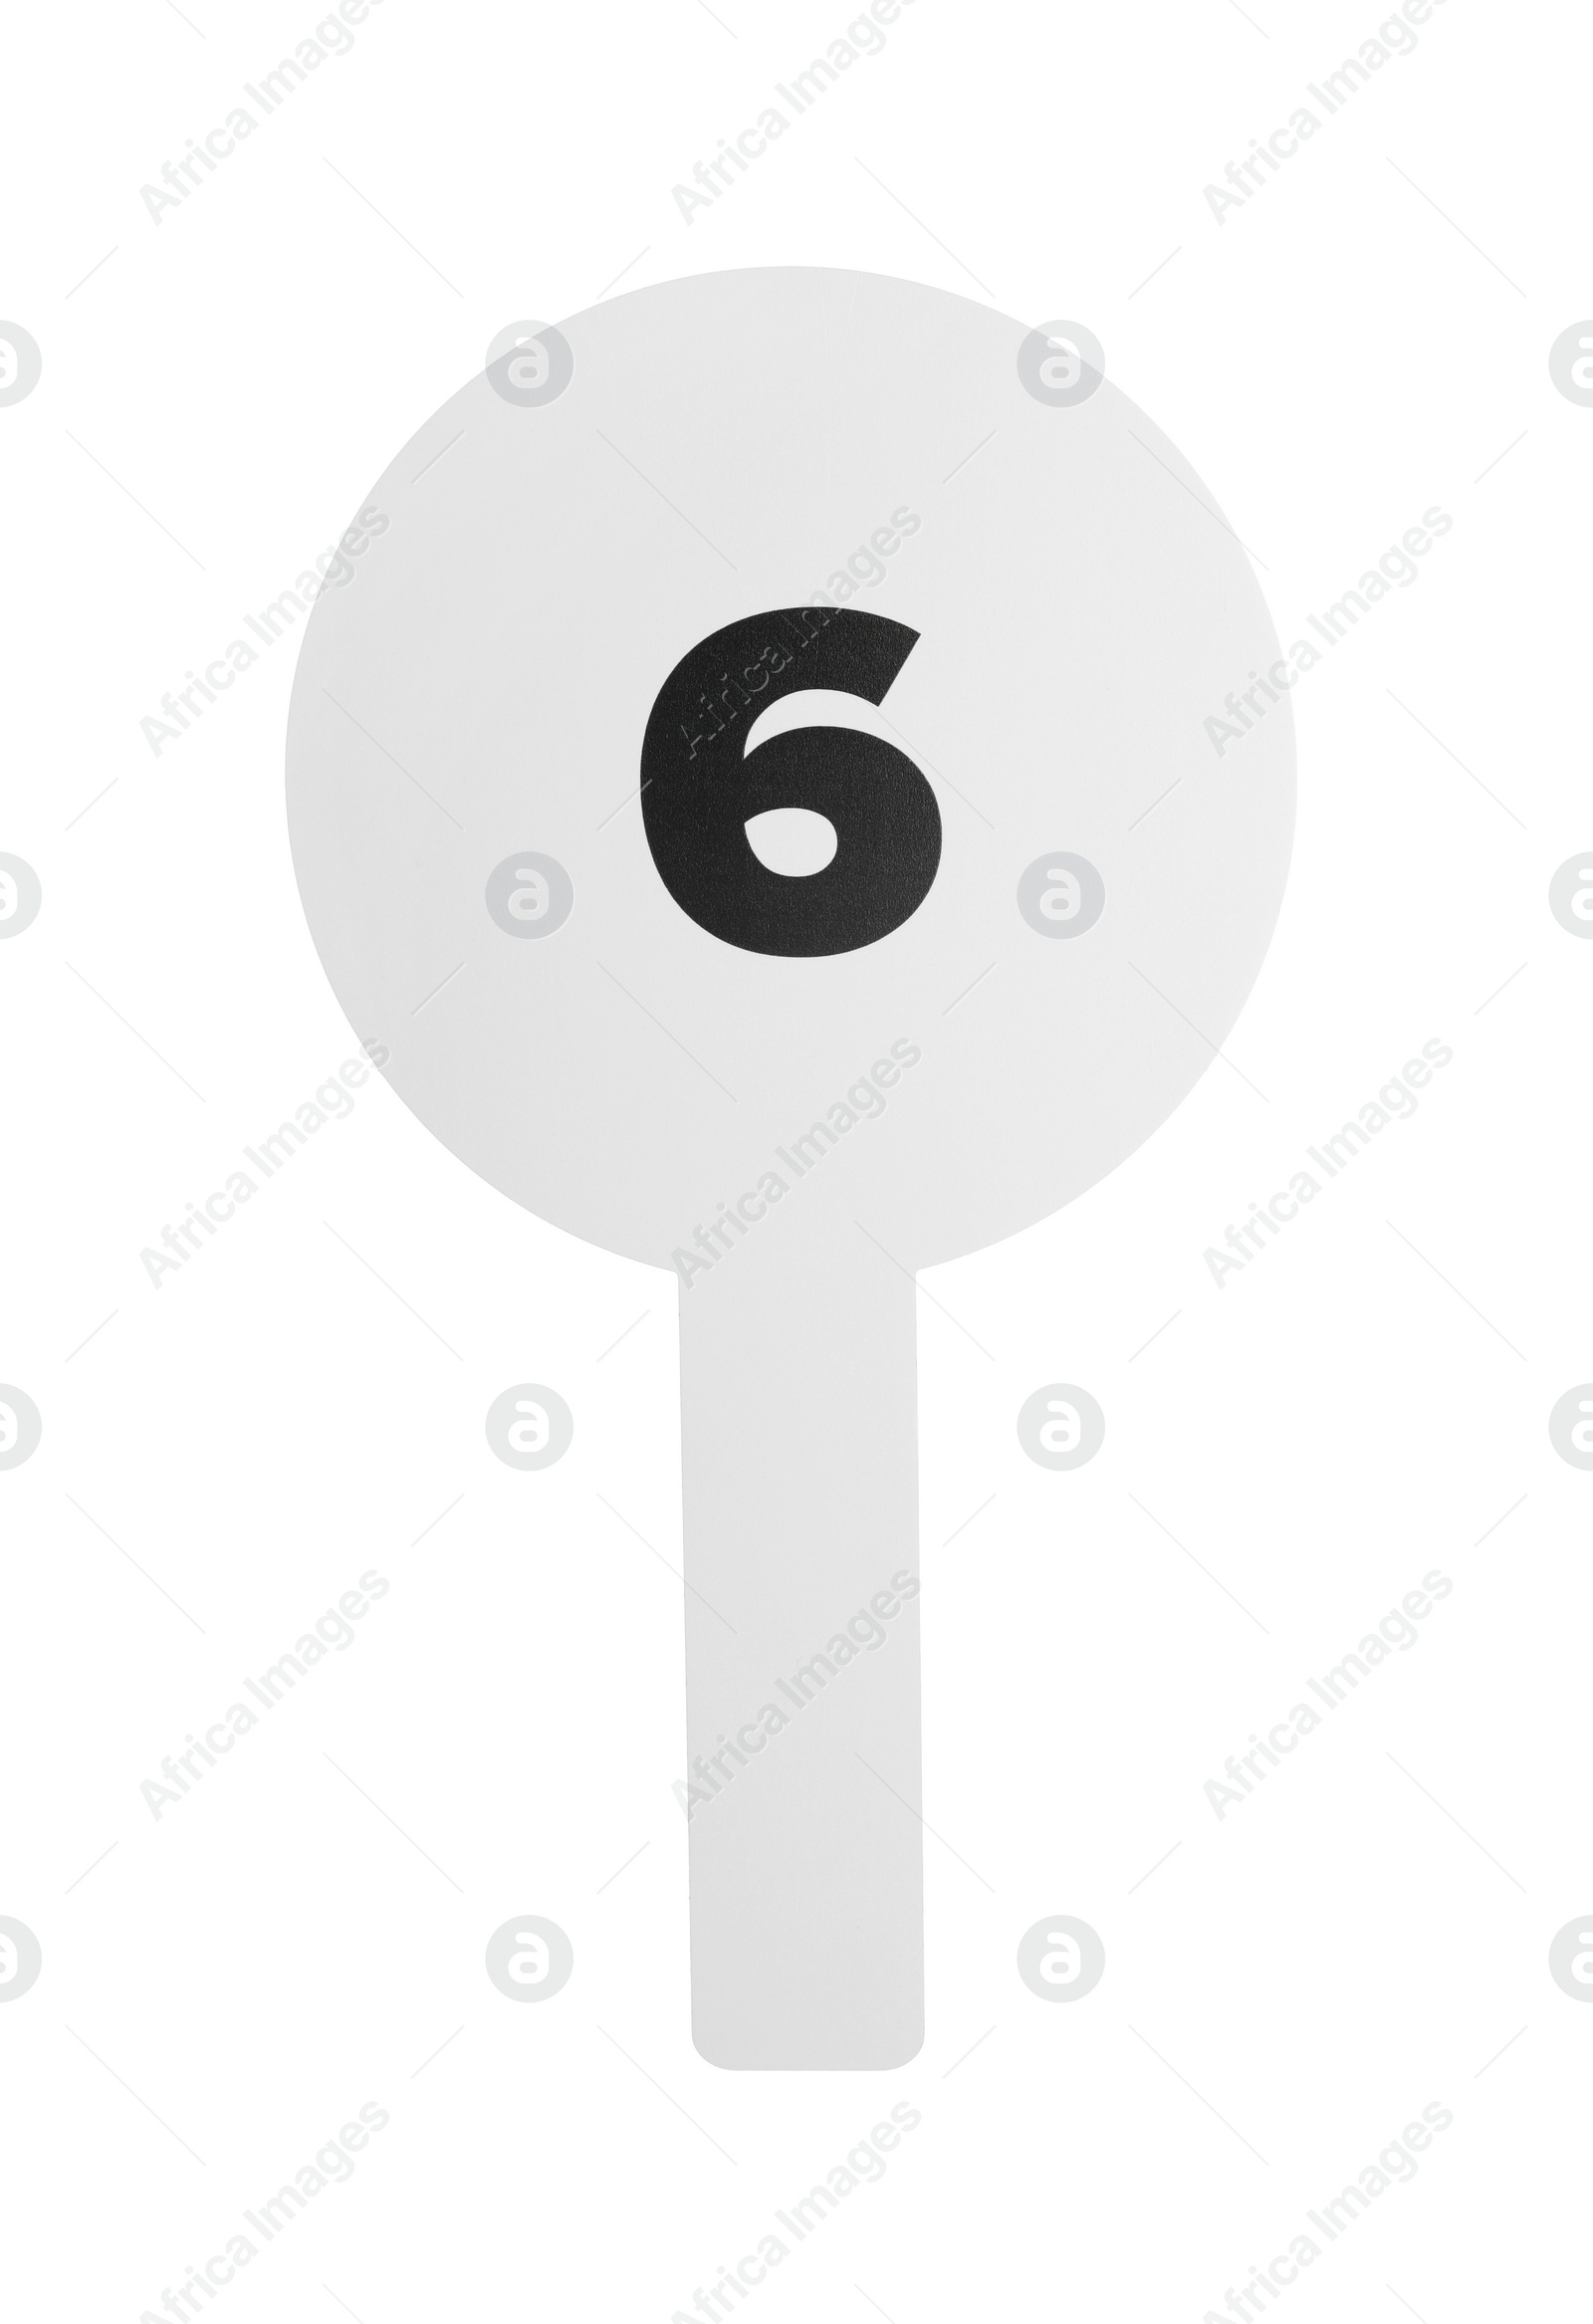 Photo of Auction paddle with number 6 isolated on white